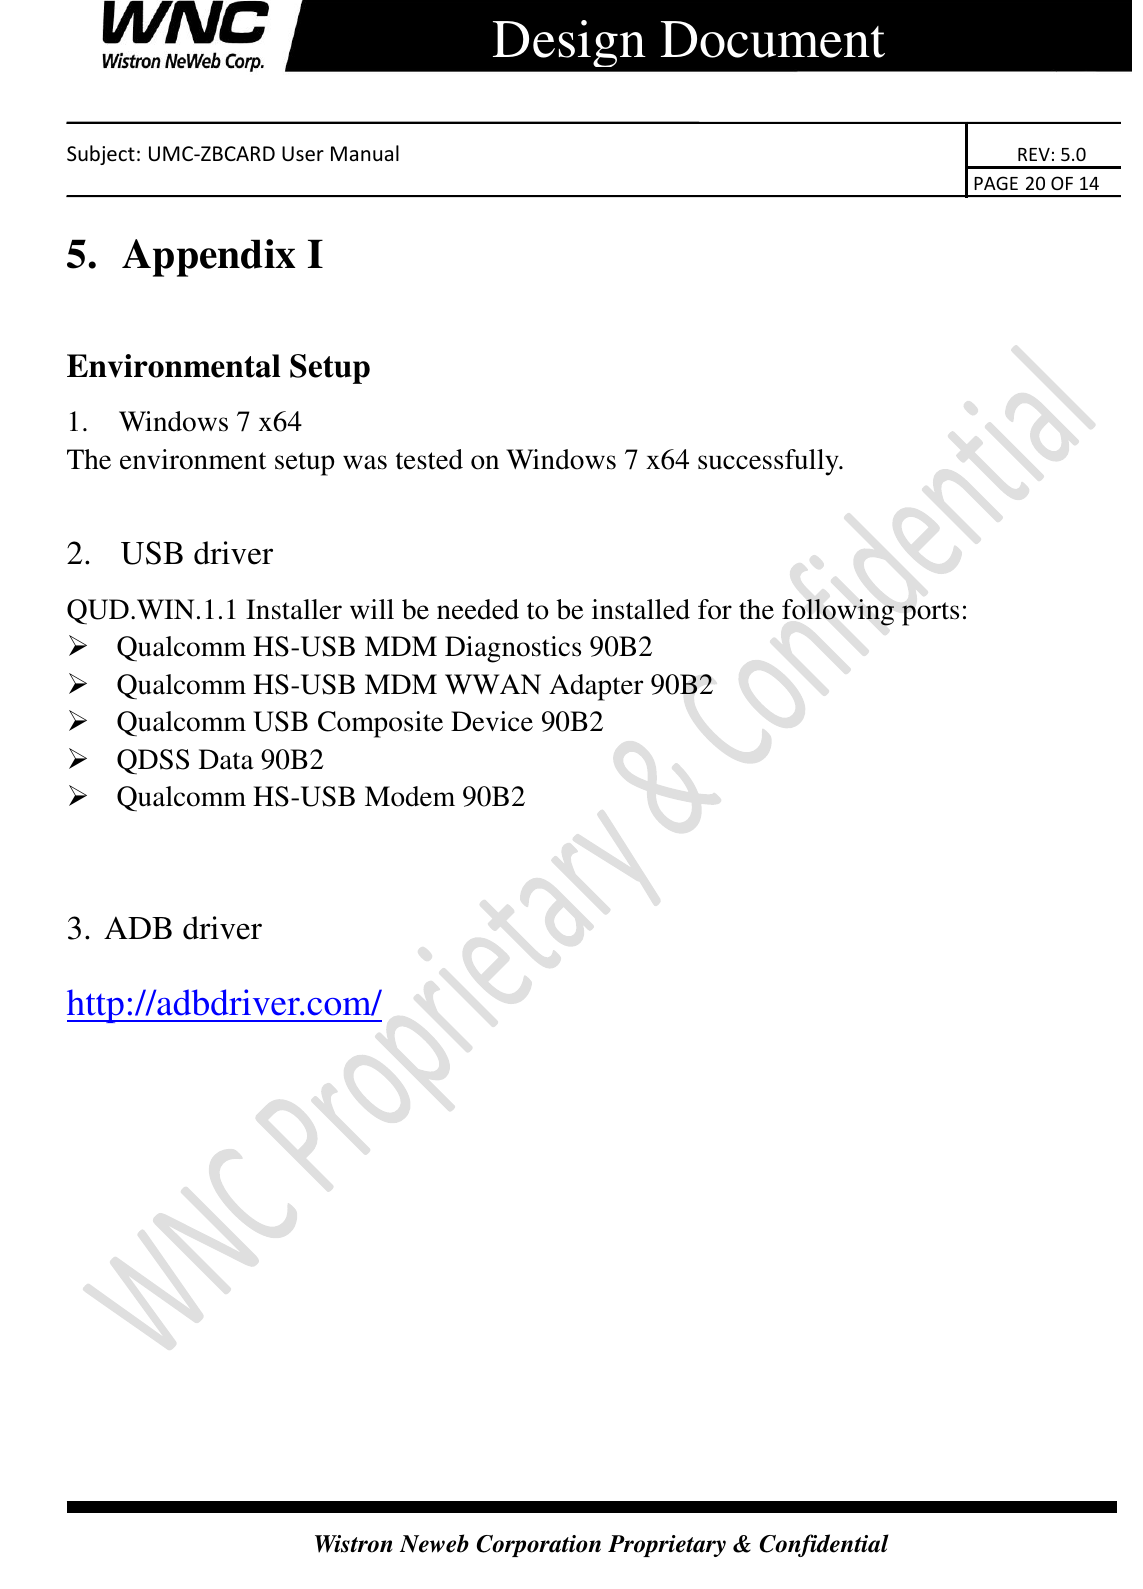    Subject: UMC-ZBCARD User Manual                                                                      REV: 5.0                                                                                        PAGE 20 OF 14  Wistron Neweb Corporation Proprietary &amp; Confidential      Design Document 5.  Appendix I Environmental Setup 1.   Windows 7 x64 The environment setup was tested on Windows 7 x64 successfully.  2.   USB driver QUD.WIN.1.1 Installer will be needed to be installed for the following ports:  Qualcomm HS-USB MDM Diagnostics 90B2  Qualcomm HS-USB MDM WWAN Adapter 90B2  Qualcomm USB Composite Device 90B2  QDSS Data 90B2  Qualcomm HS-USB Modem 90B2  3. ADB driver http://adbdriver.com/ 